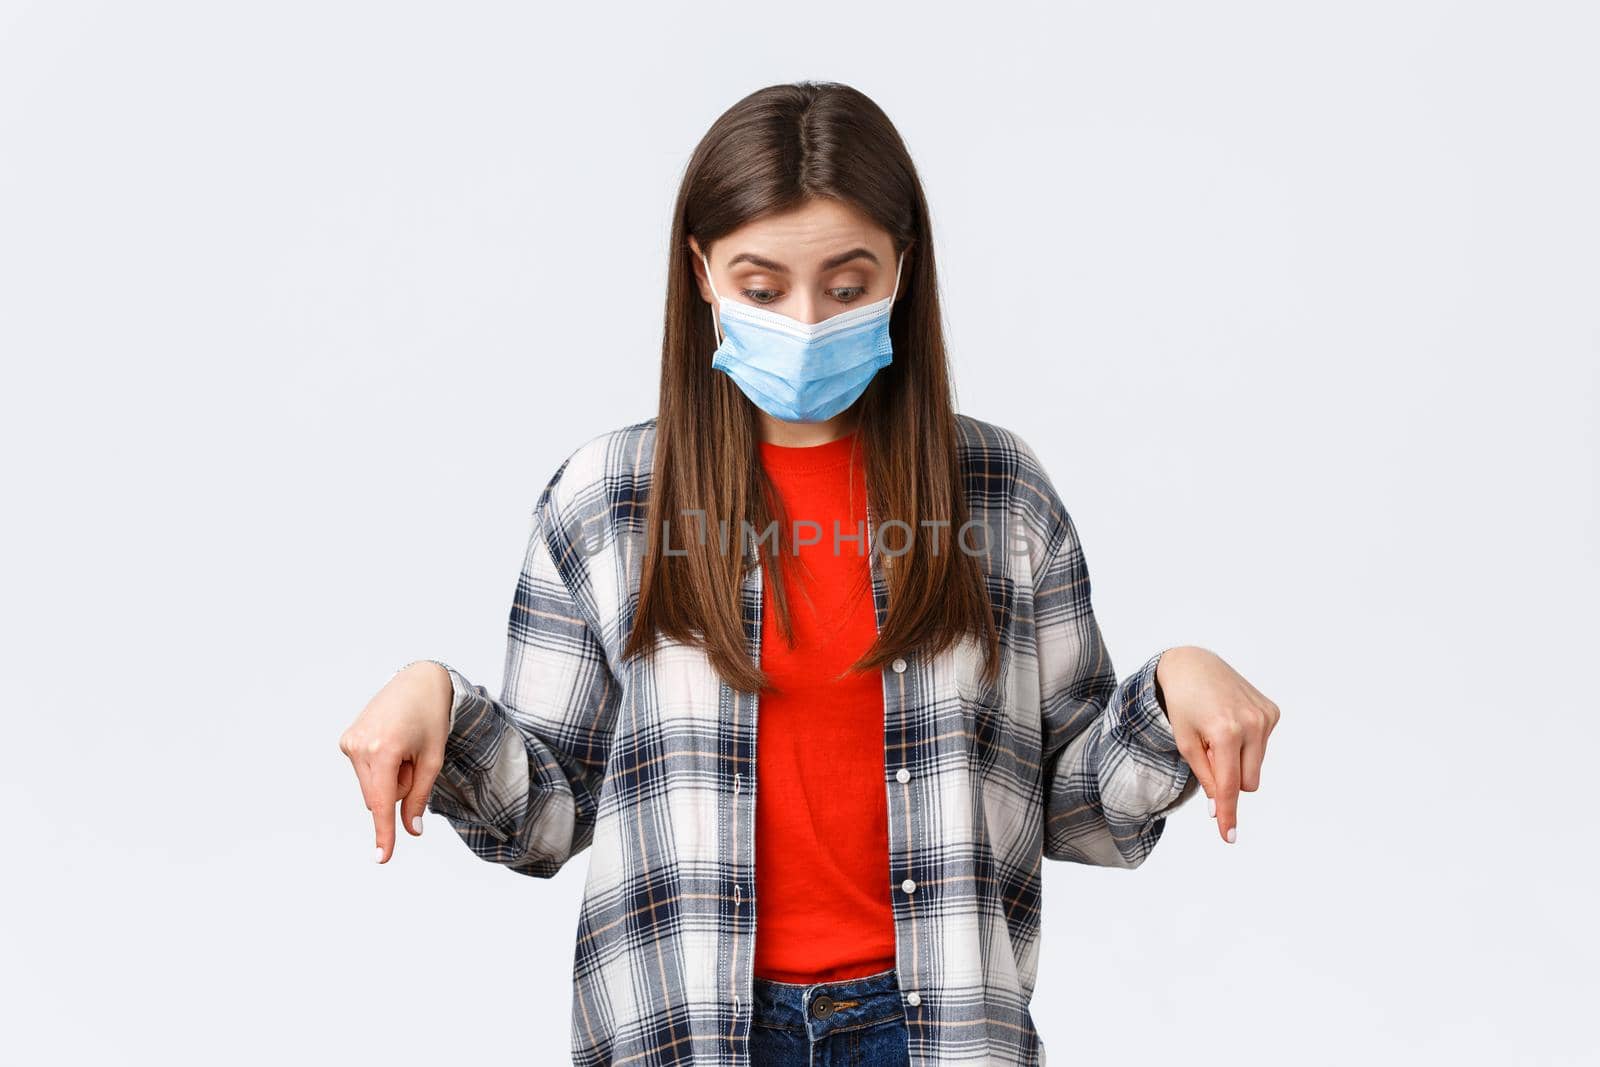 Coronavirus outbreak, leisure on quarantine, social distancing and emotions concept. Intrigued cute girl in medical mask. Woman wearing PPE from virus infection, looking pointing down.